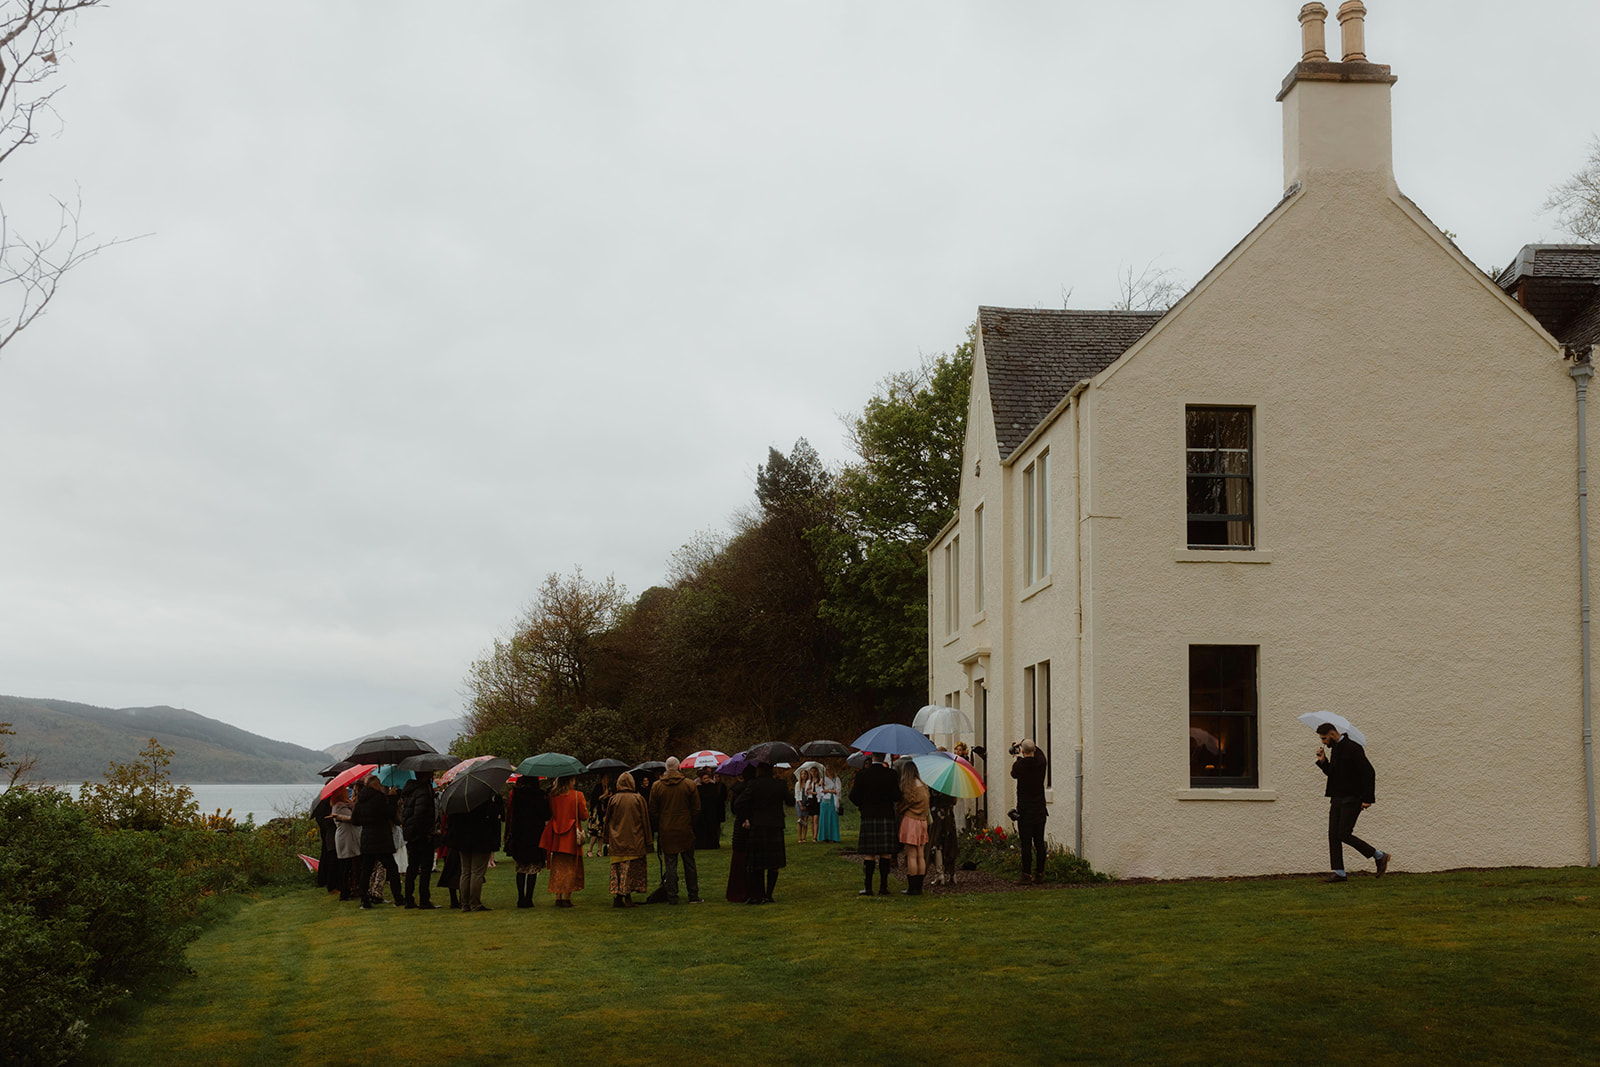 The guests during Becca and Simon'sTulach Ard Wedding celebration at the Isle of Skye, Scotland